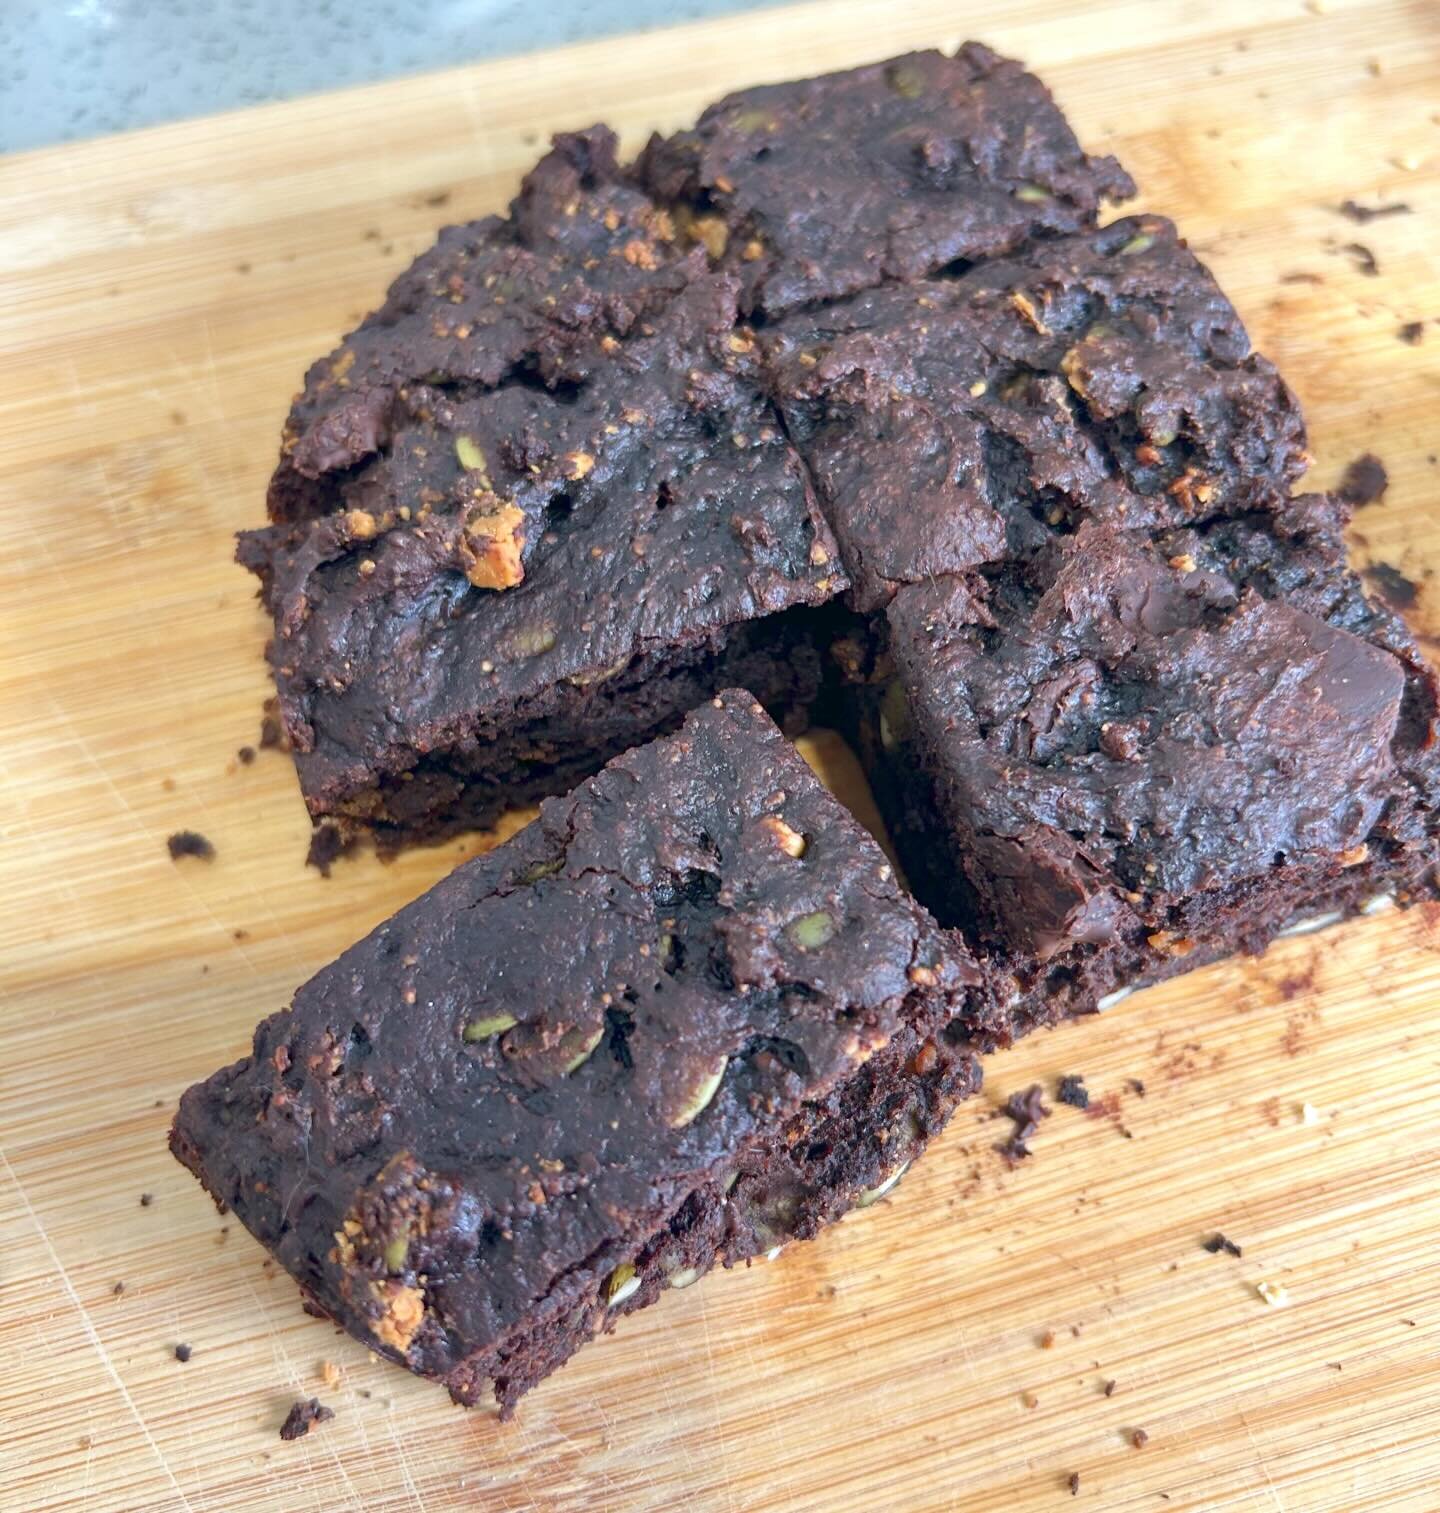 Brownies but make them vegan, grain-free, gluten-free and refined sugar-free !! 🤎🤎🤎

Ingredients ~ 
40 g / &frac14; cup linseed (flax seed) meal
1 teaspoon baking powder
&frac12; teaspoon bicarbonate of soda 
60 g / 1/2 cup raw cacao powder or coc